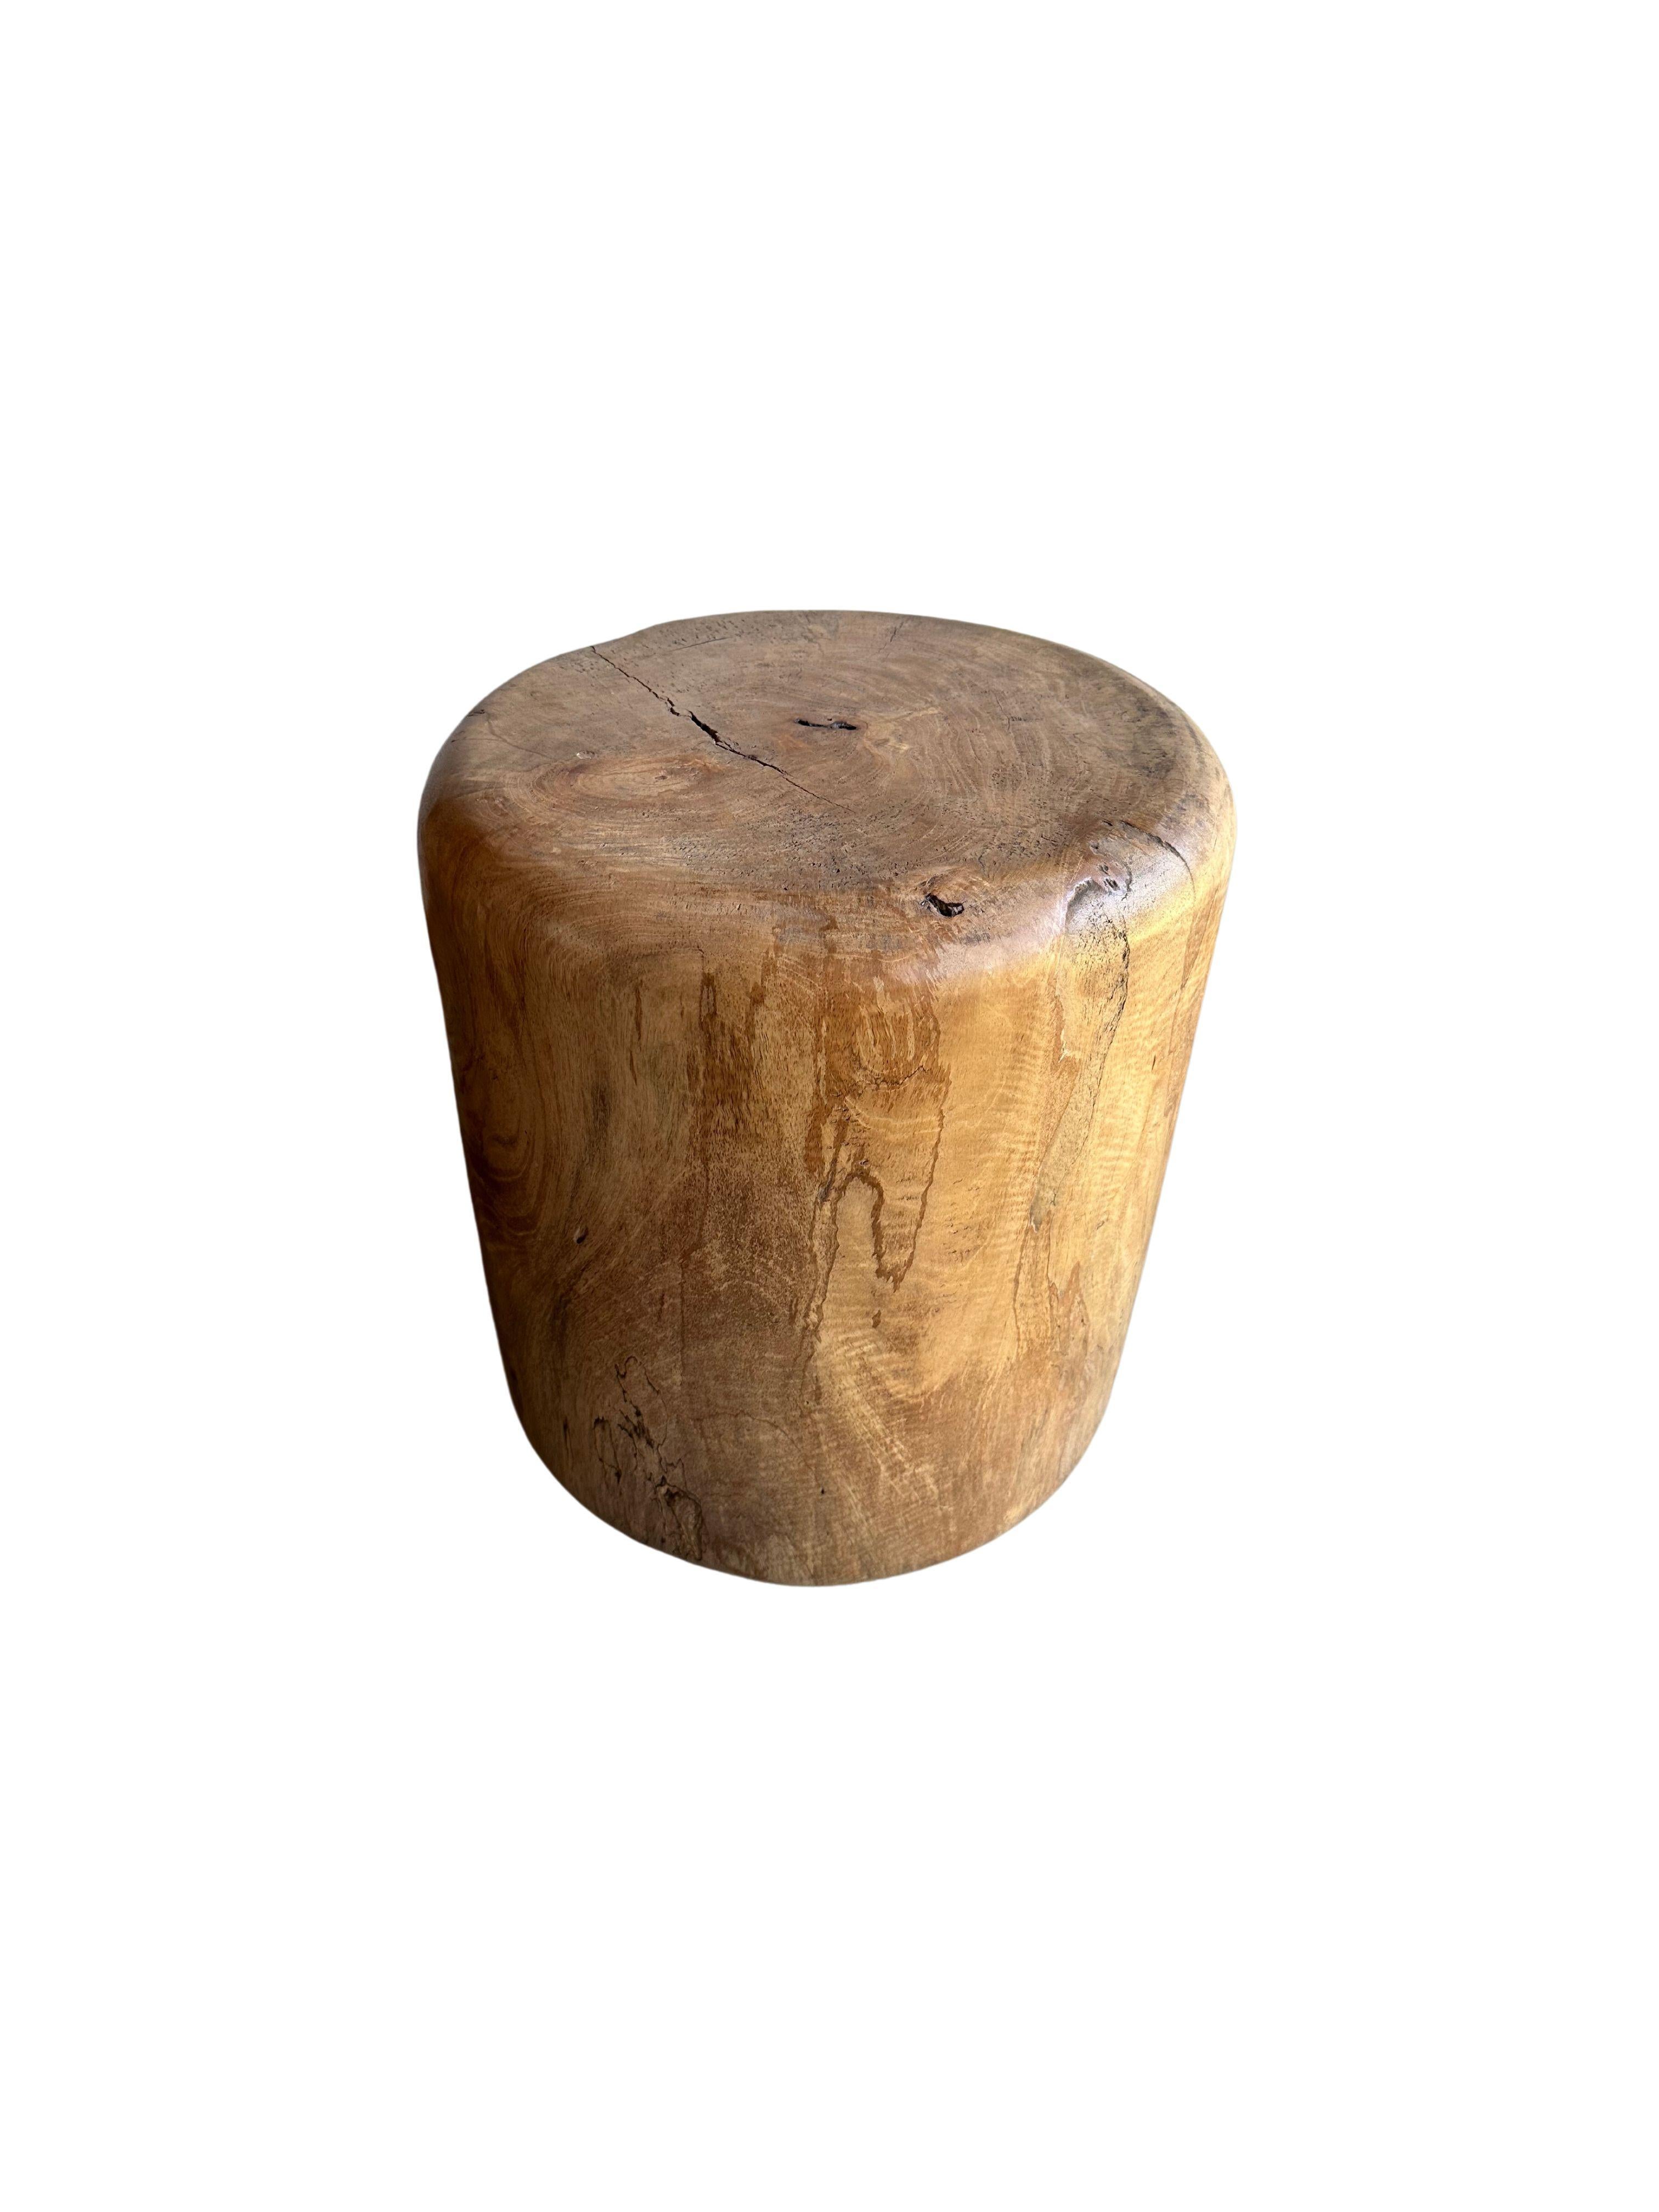 Organic Modern Sculptural Meranti Wood Side Table, with Stunning Wood Textures, Modern Organic For Sale